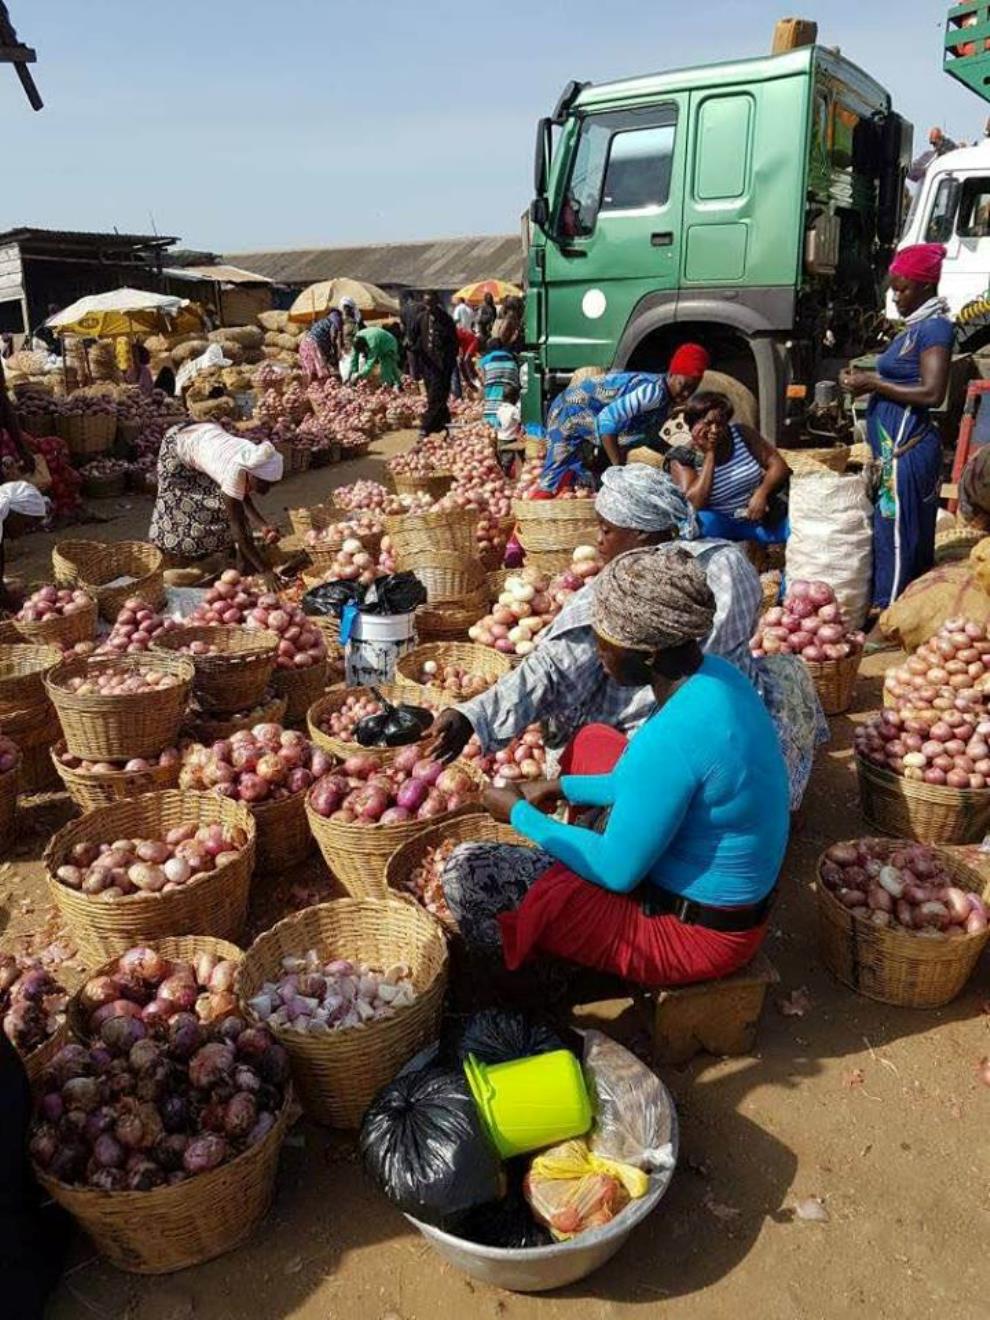 Onion Sellers Demand Apology From NPP’s Hajia Fati